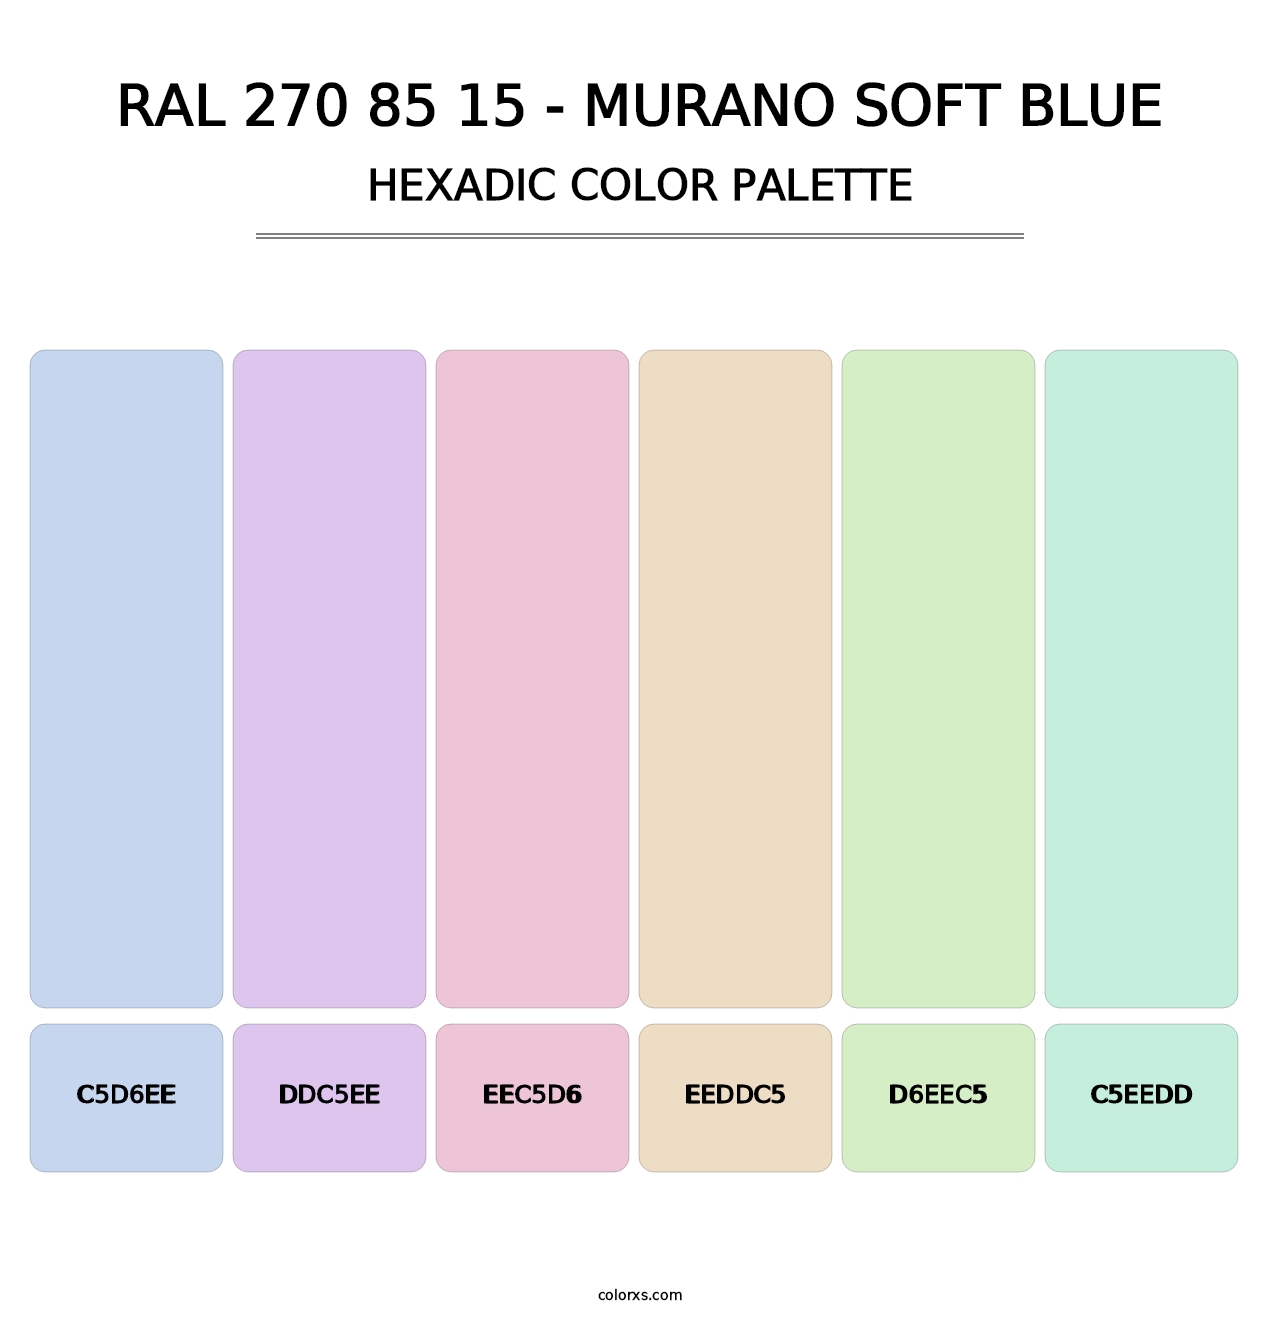 RAL 270 85 15 - Murano Soft Blue - Hexadic Color Palette